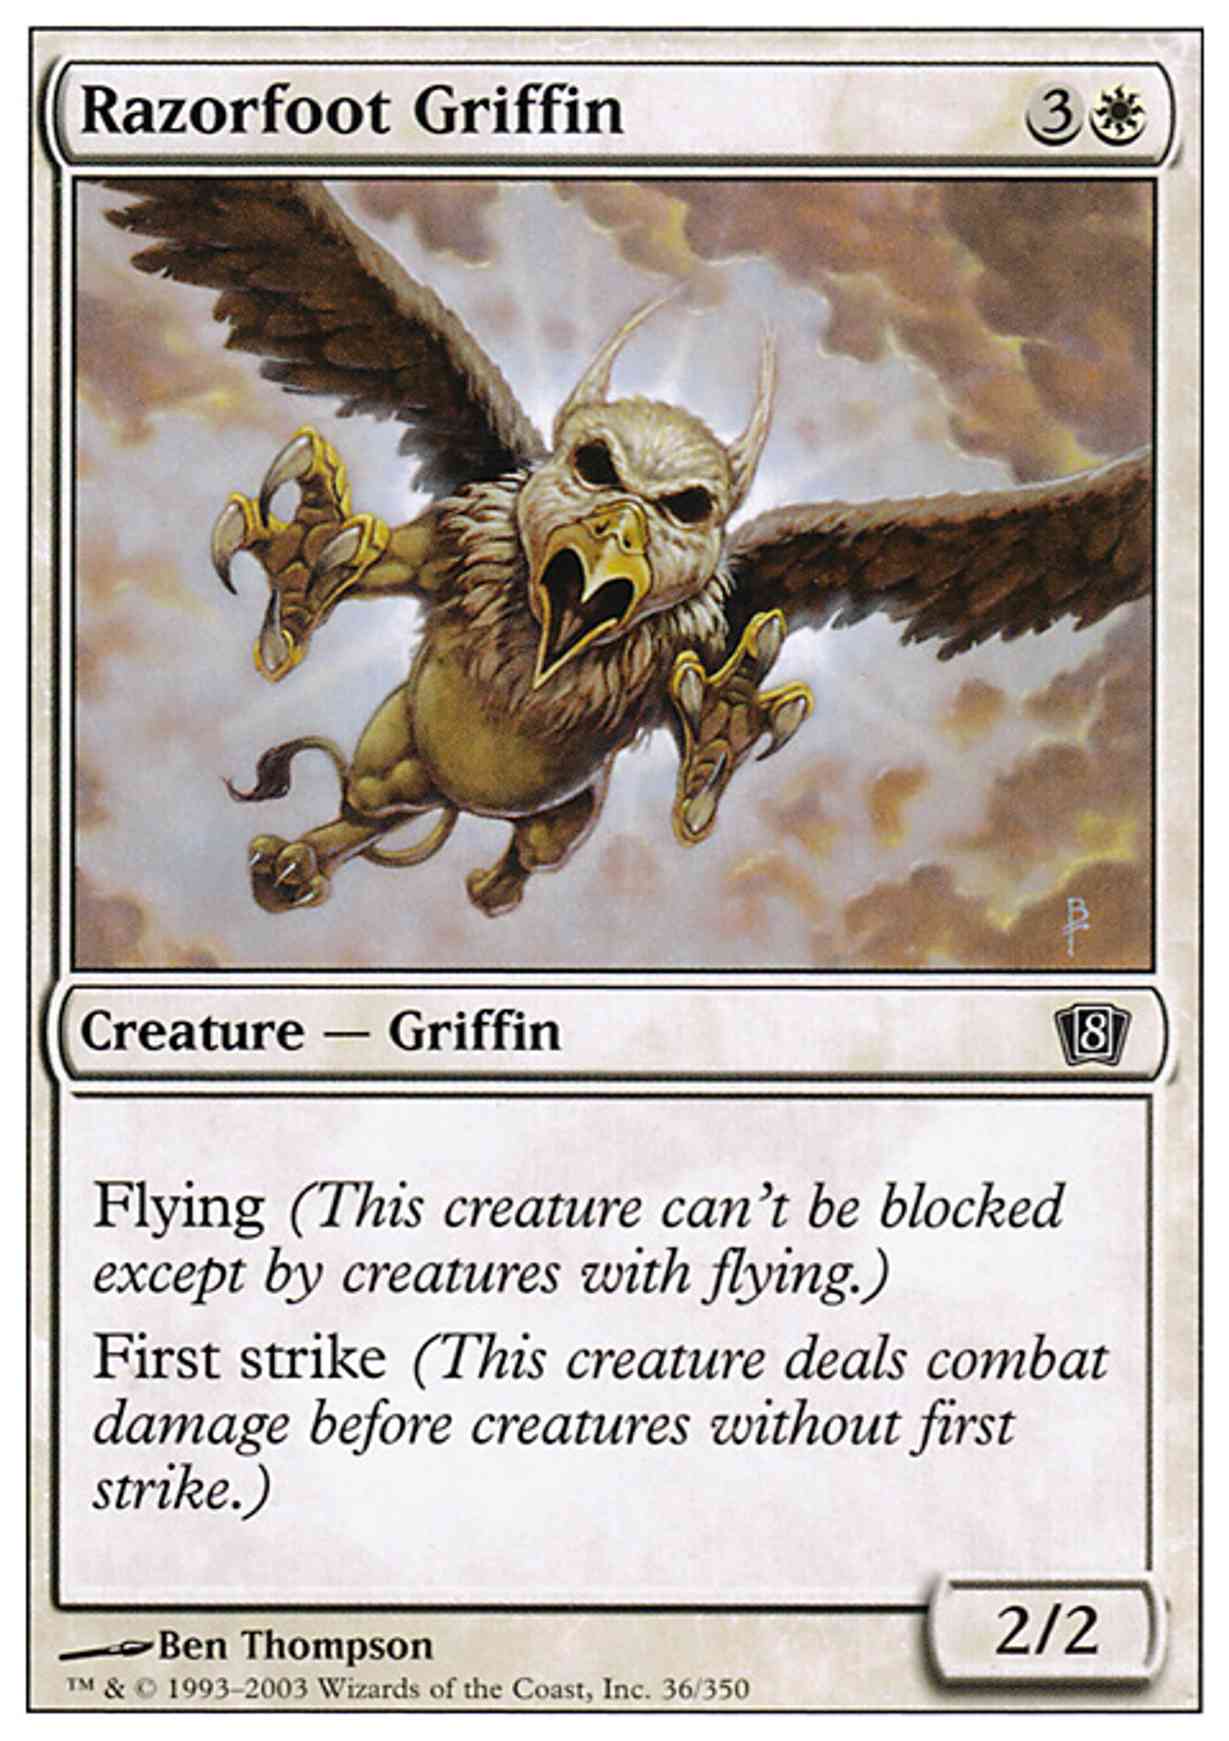 Razorfoot Griffin magic card front